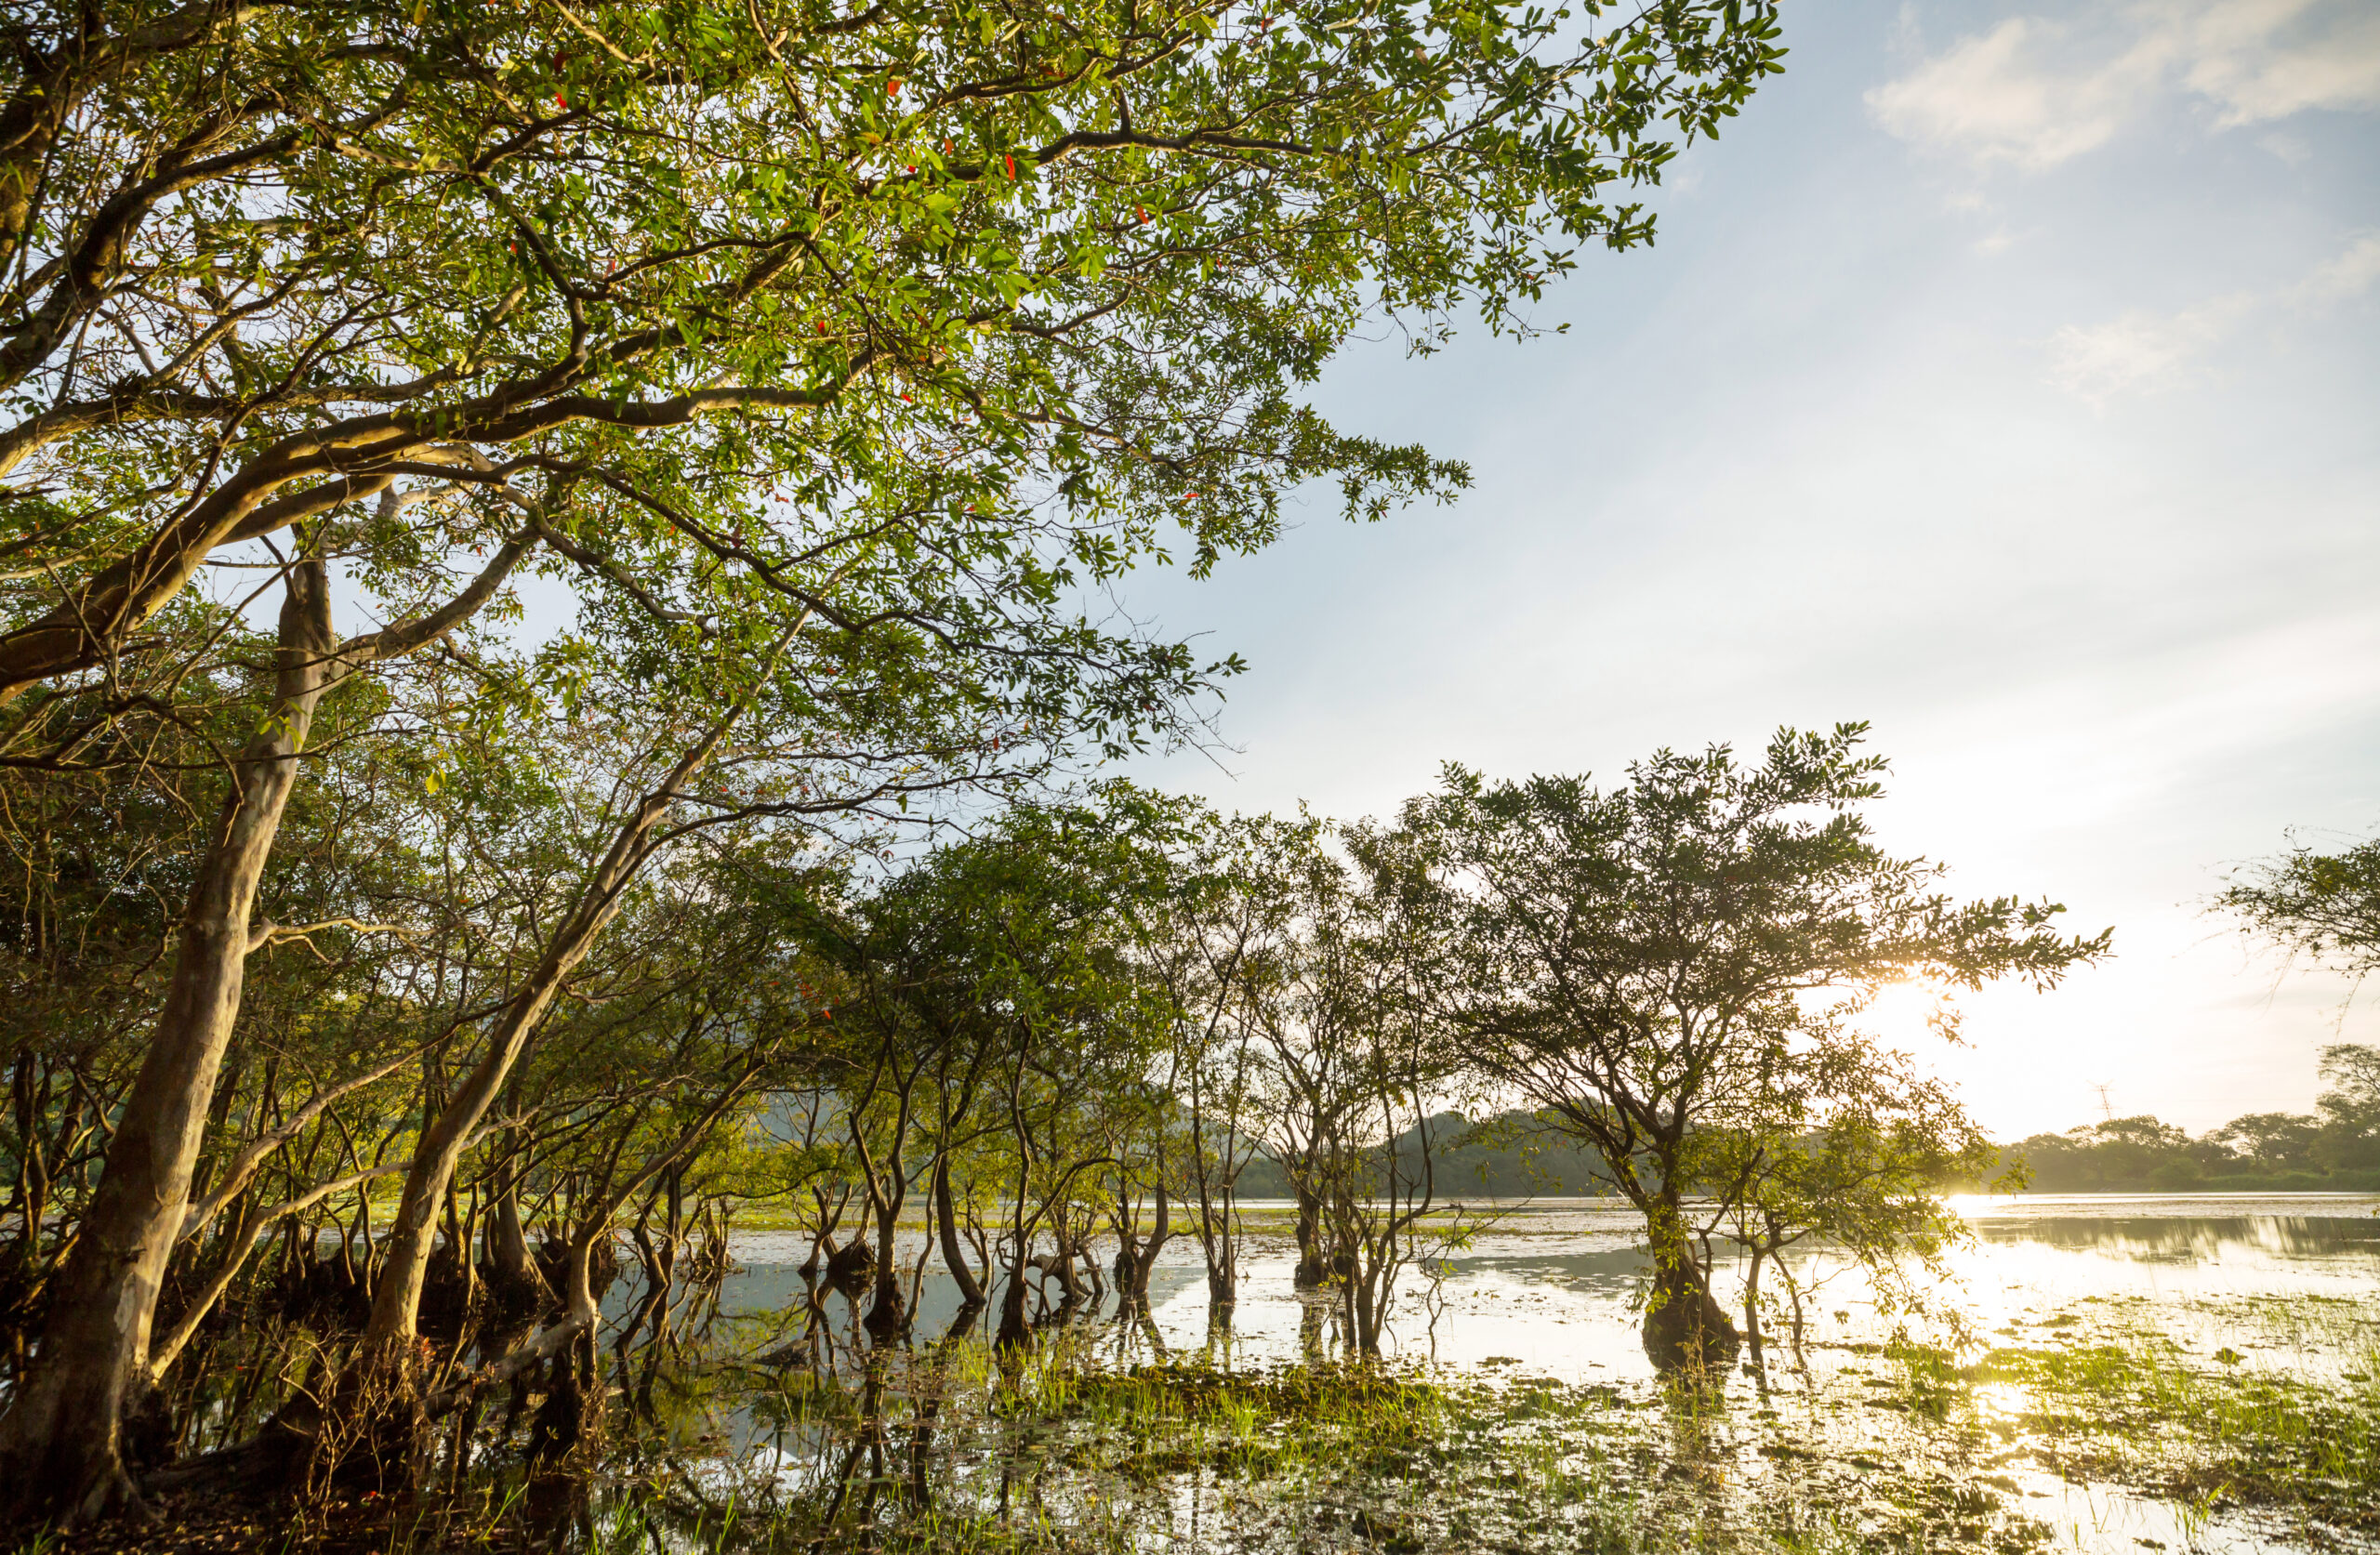 Wetlands – Mangroves, Marshes and Bogs